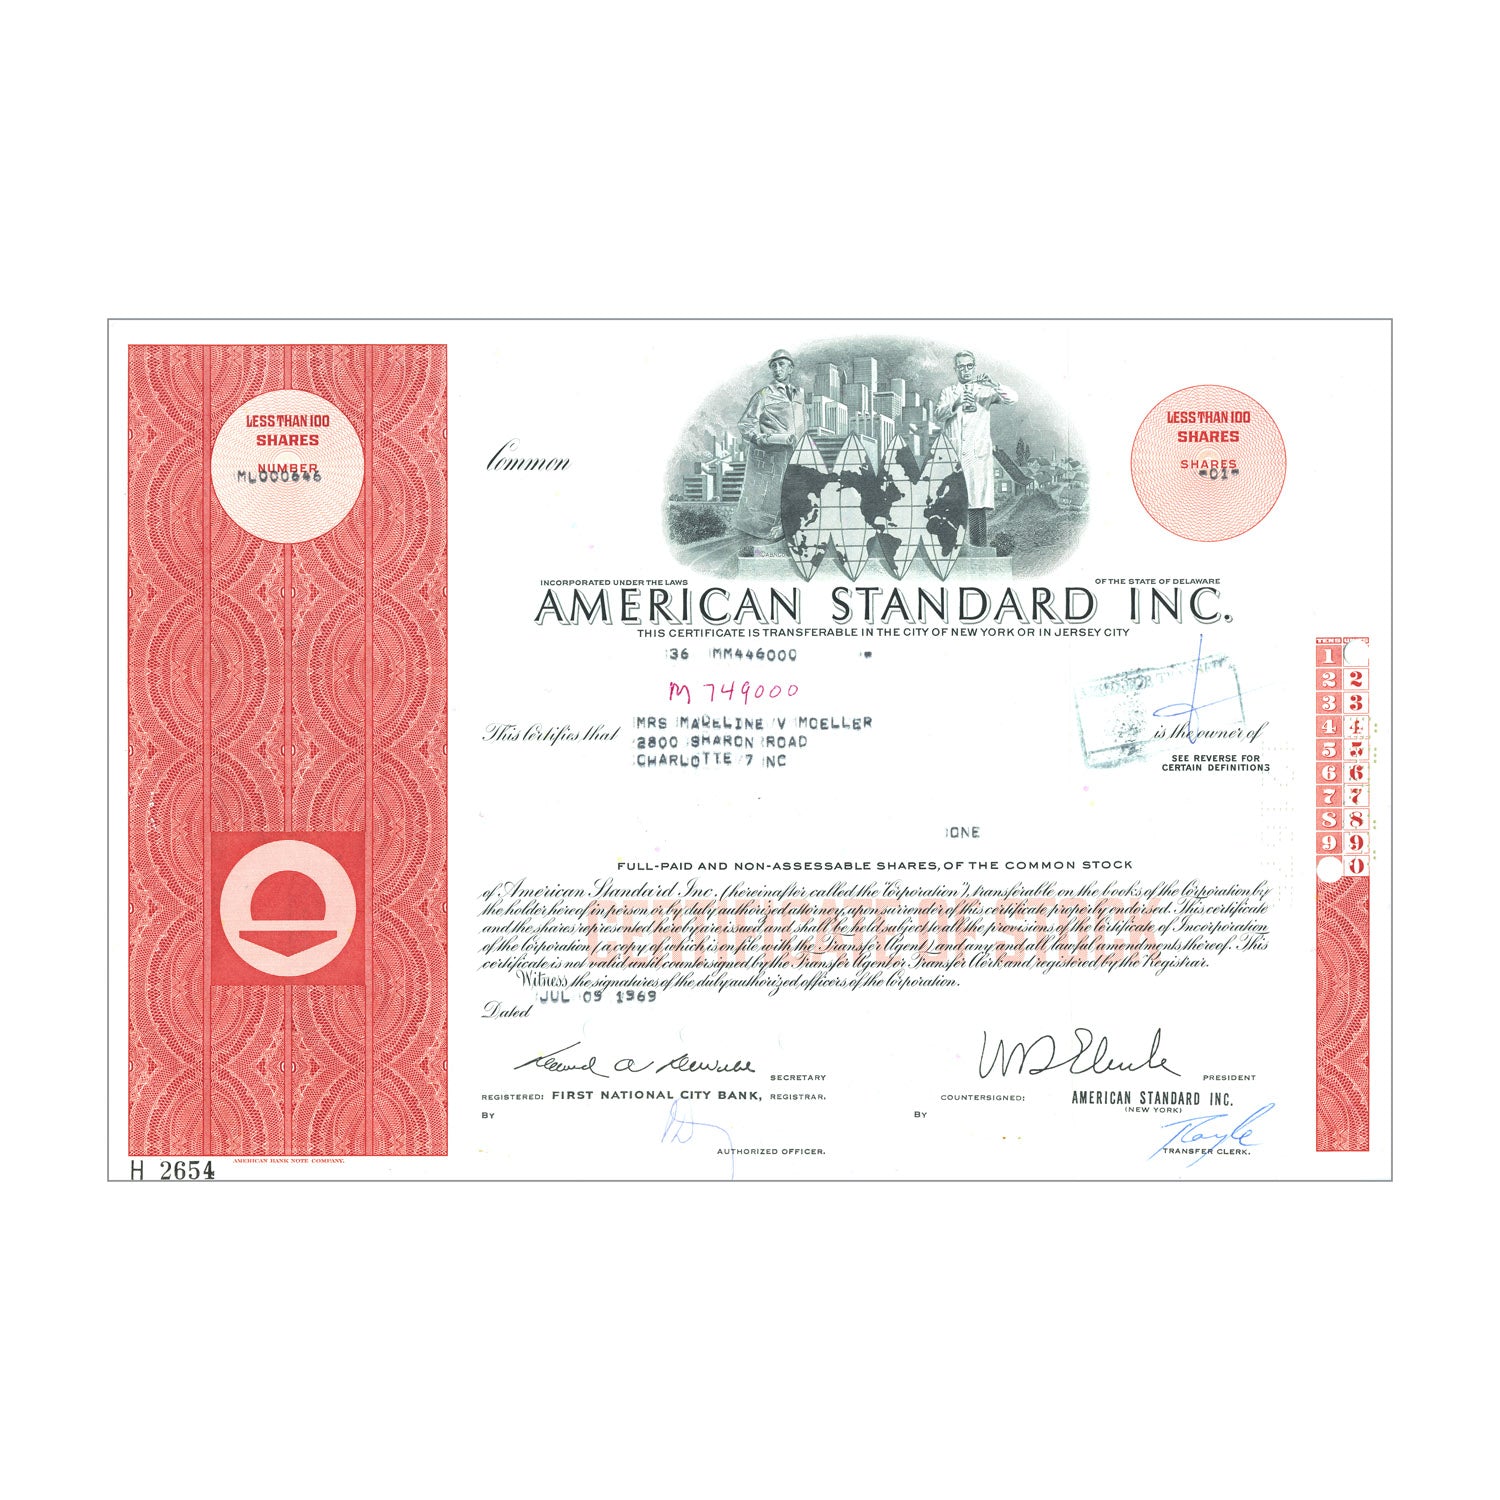 American Standard Inc. Stock Certificate // 1-99 Shares // Red // 1960s-70s